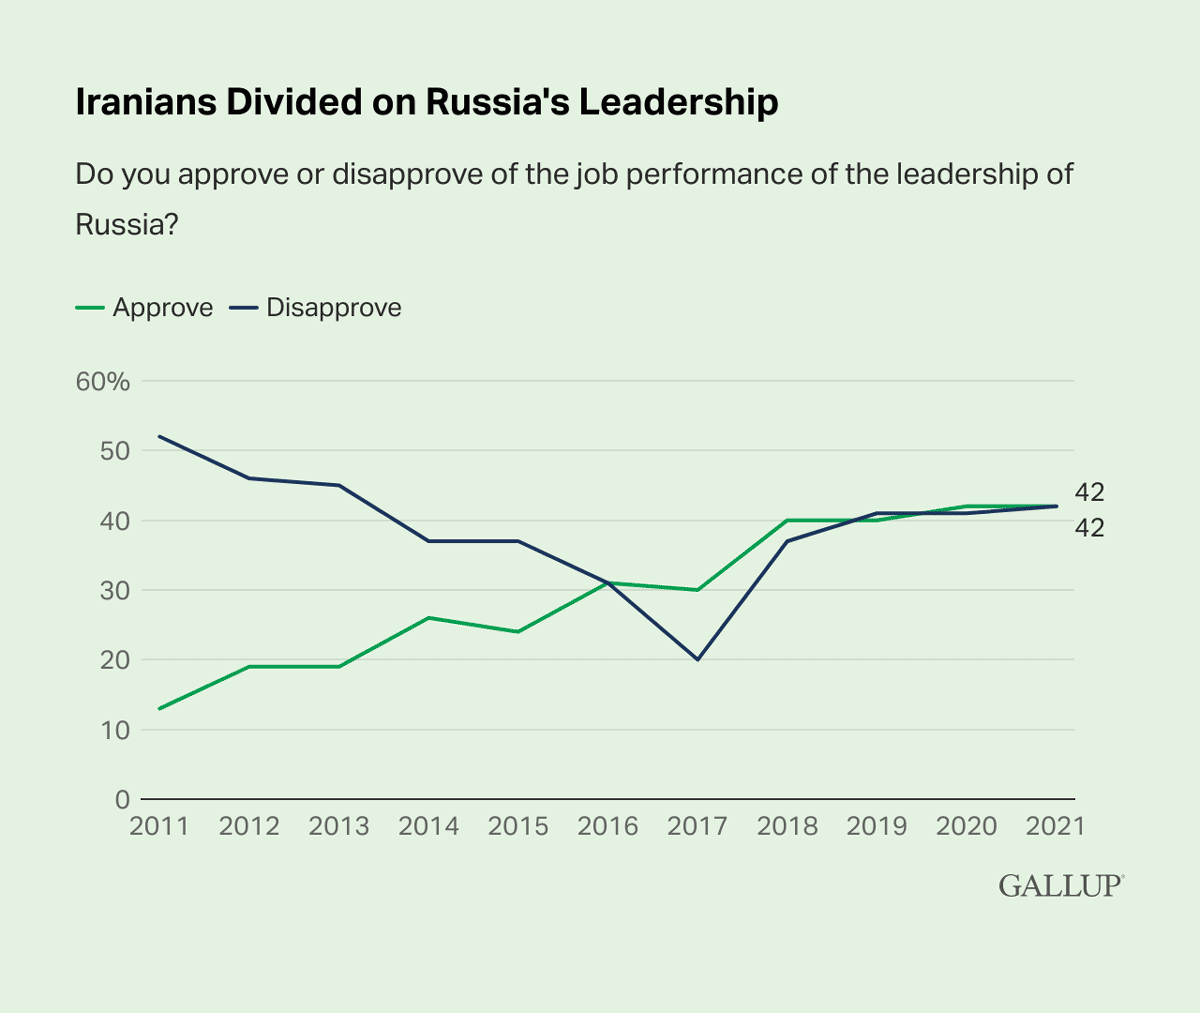 Iranians approval or disapproval of the leadership of Russia data graph